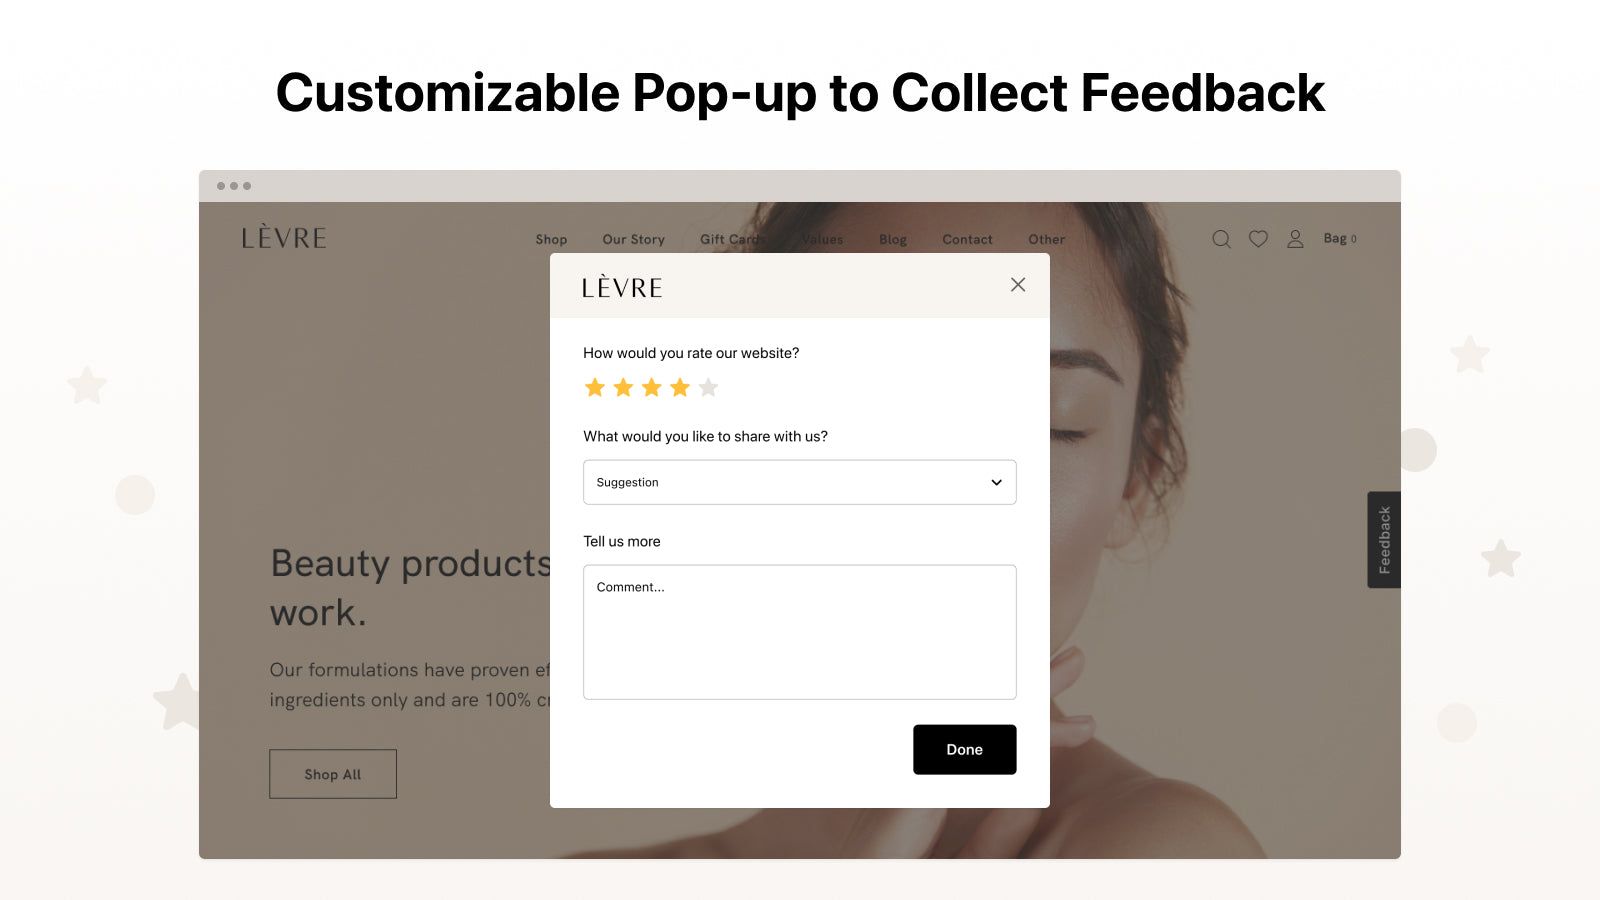 Customizable Pop-up to Collect Feedback